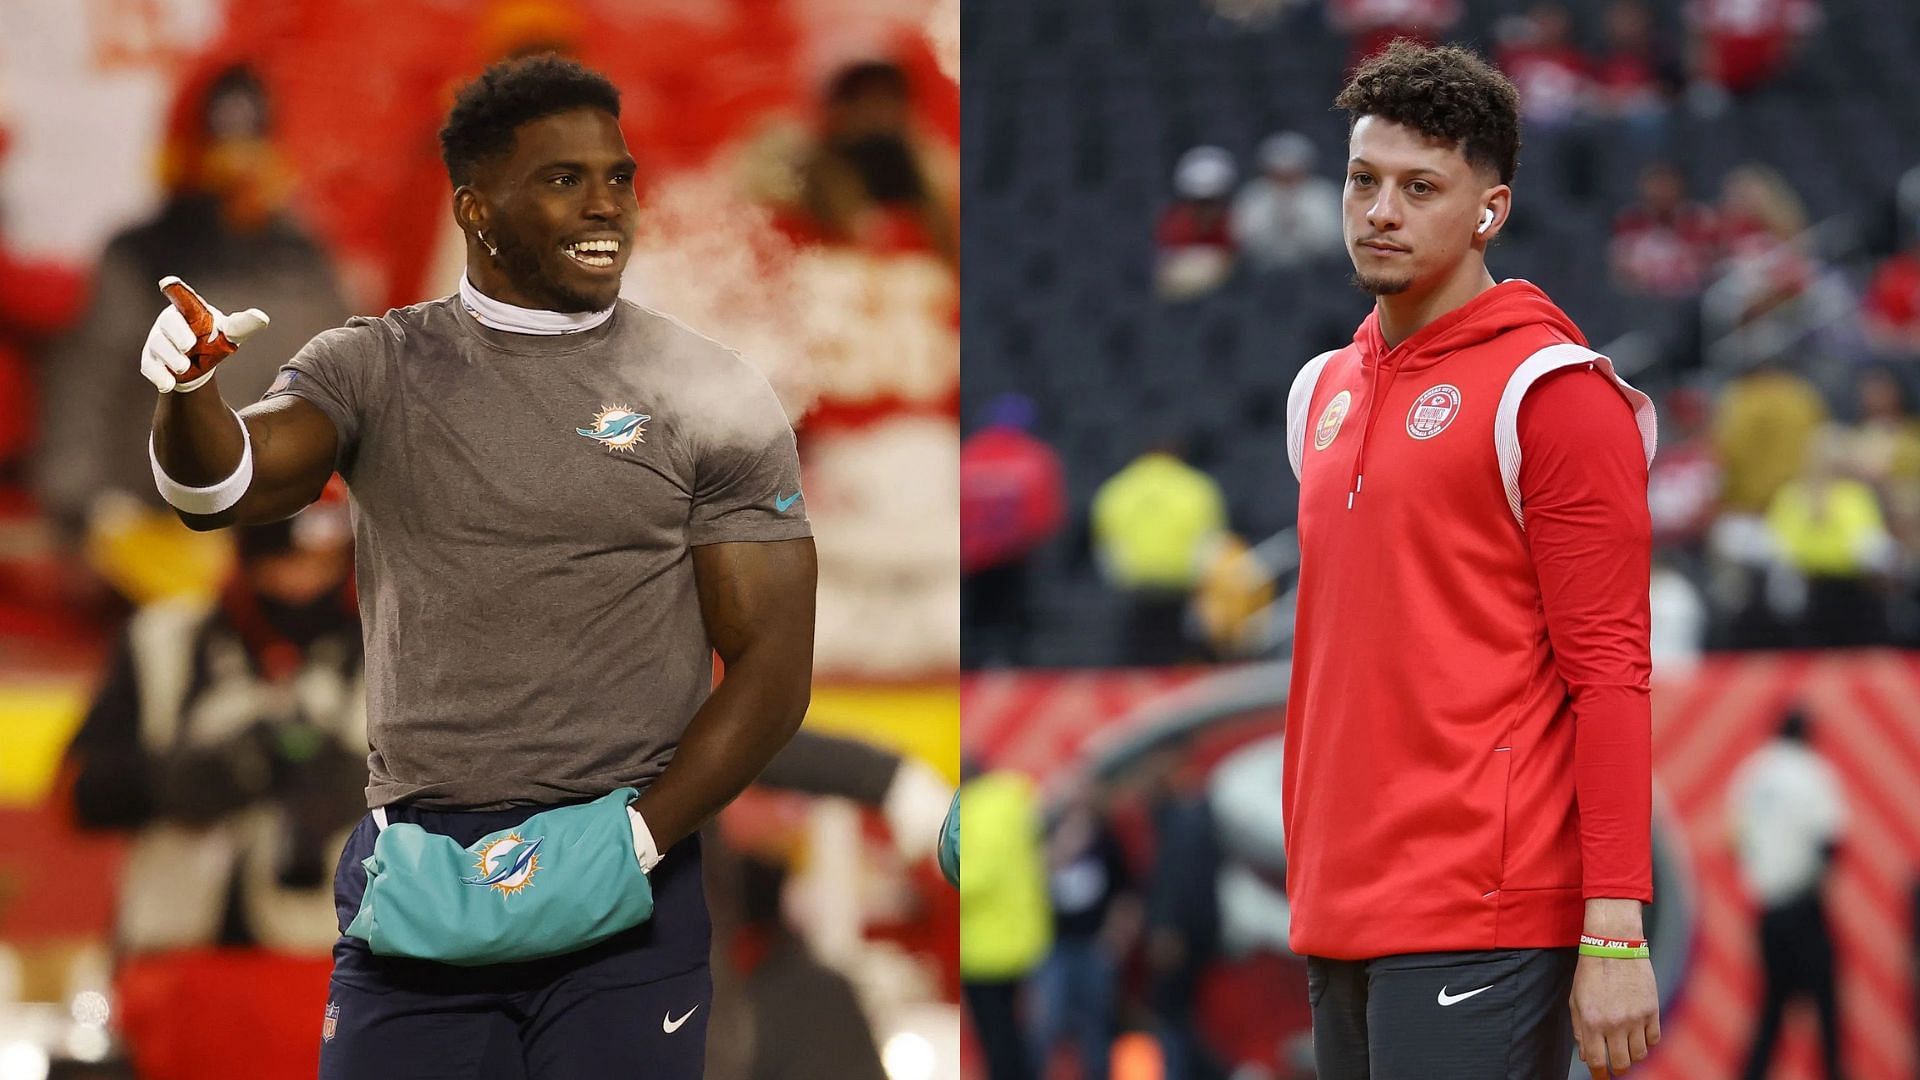 Tyreek Hill discusses leaving Patrick Mahomes and the Chiefs again